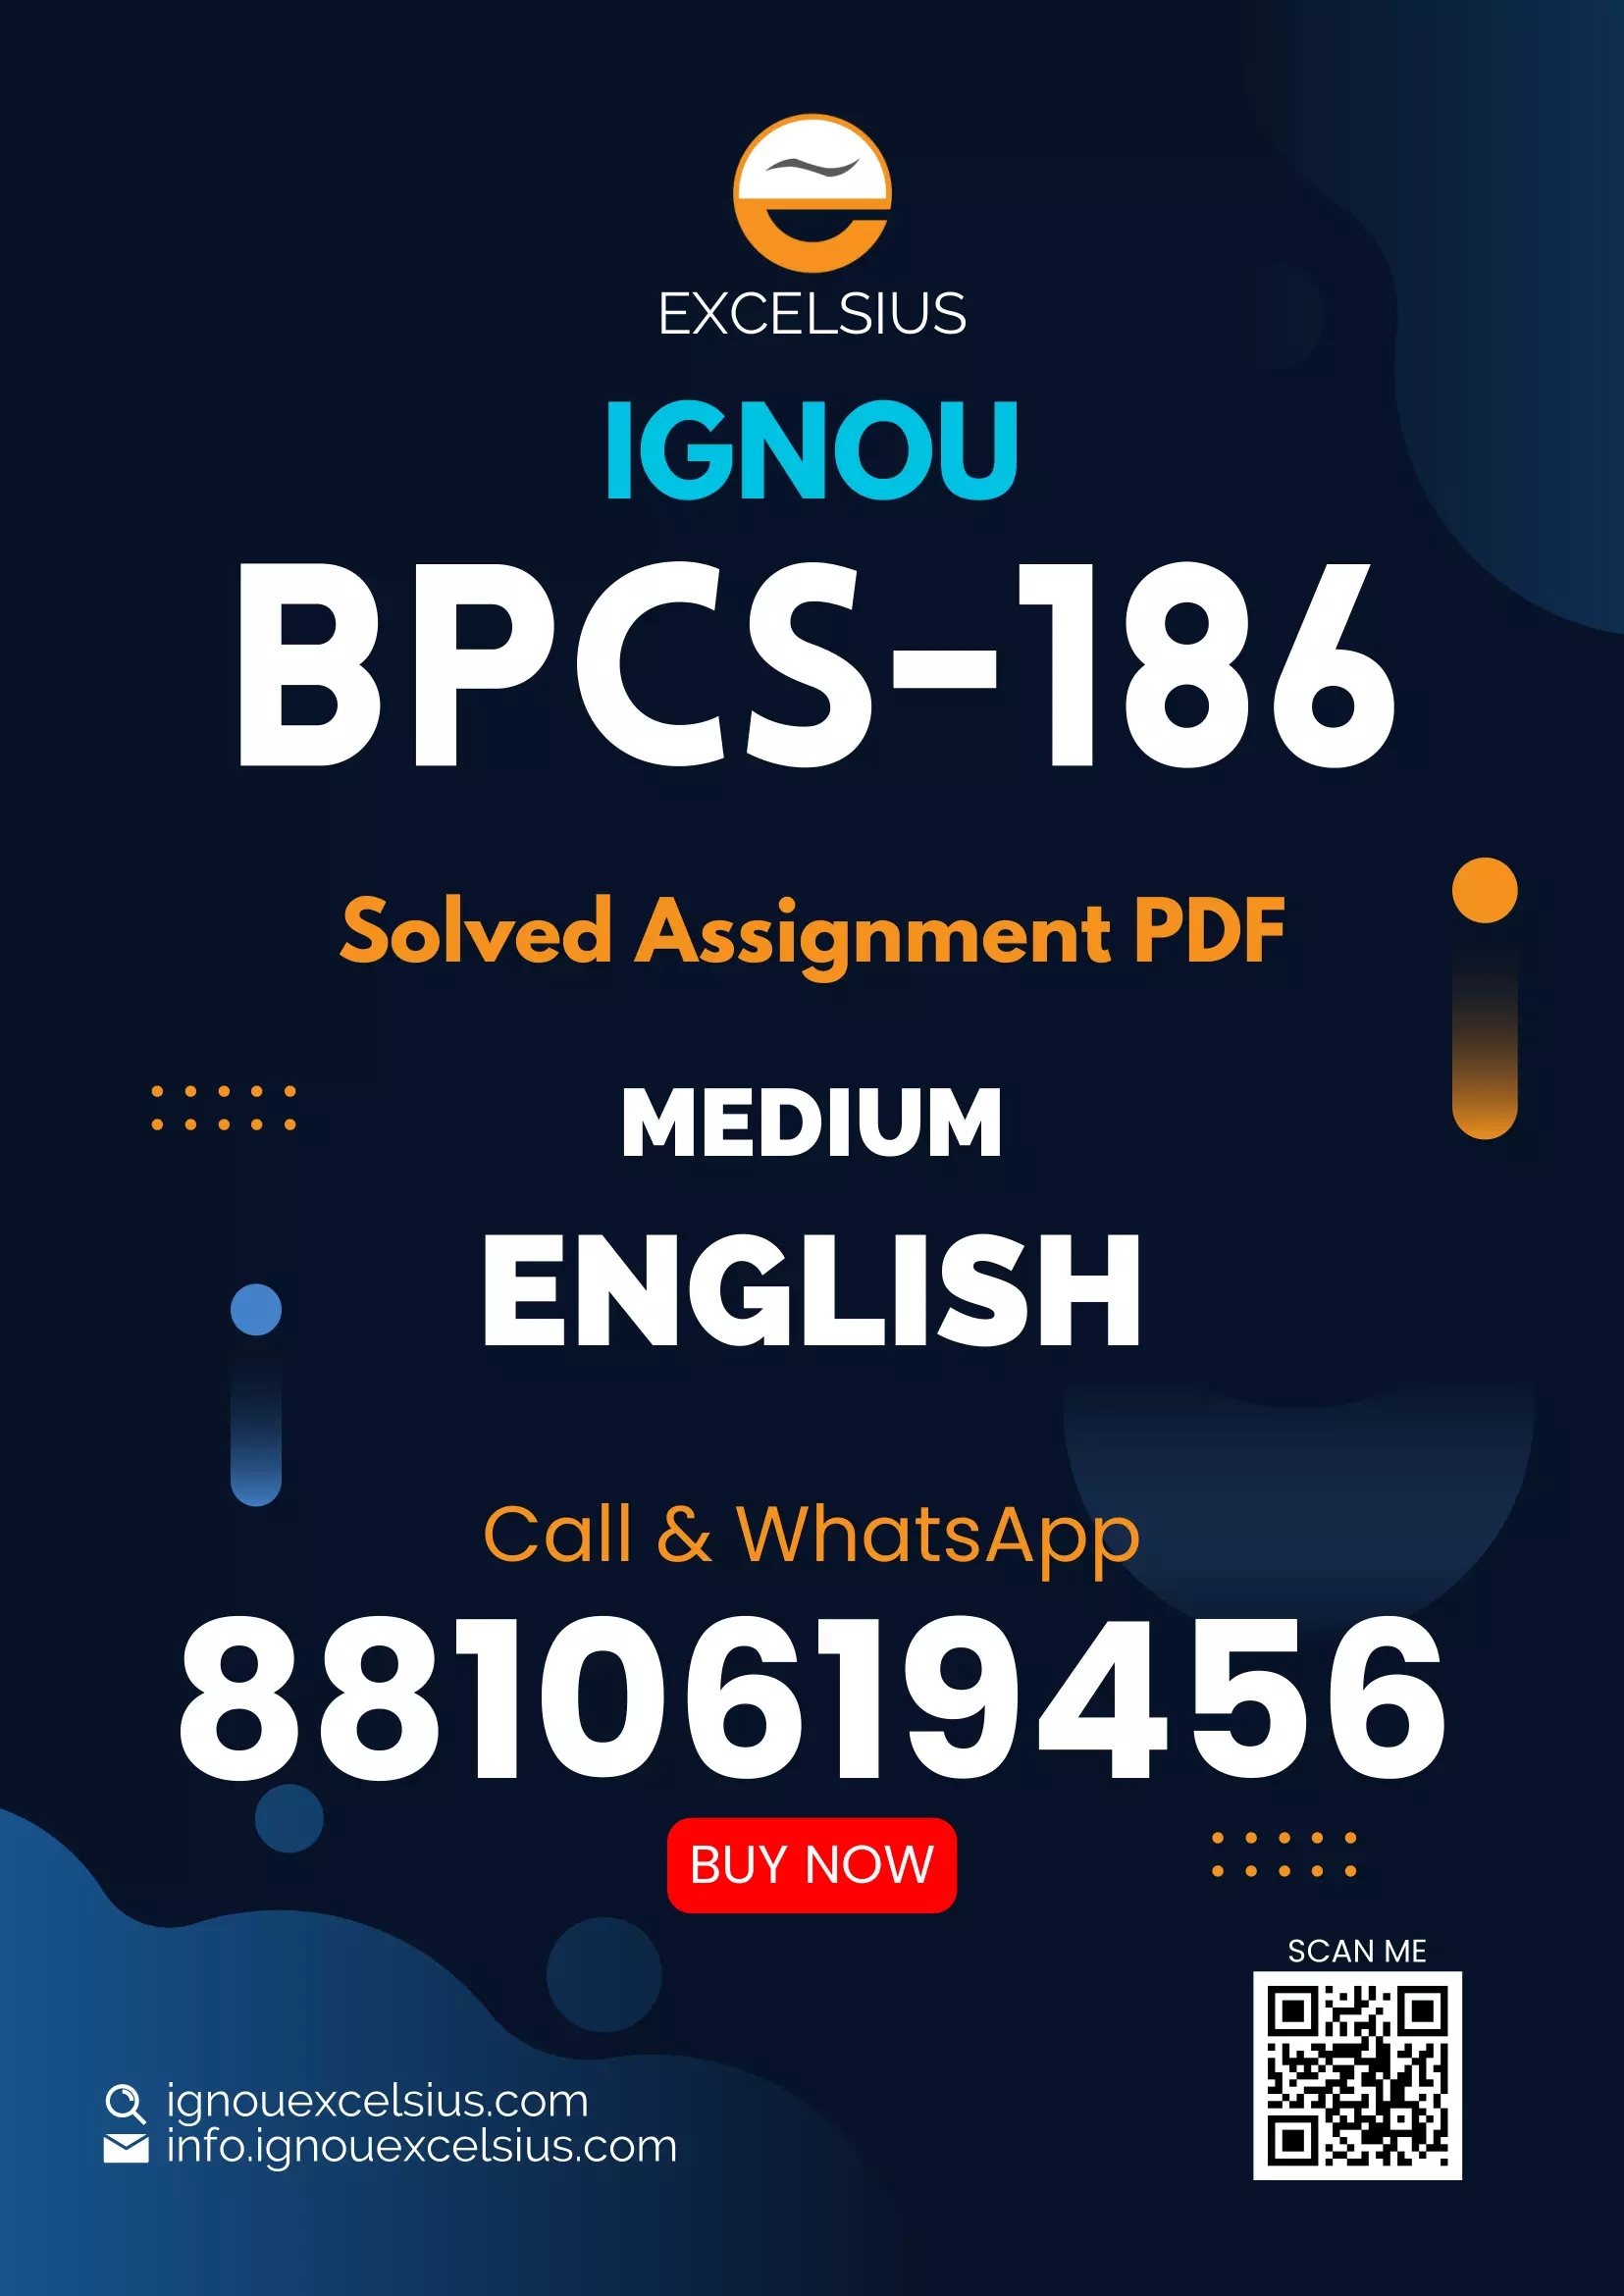 IGNOU BPCS-186 - Managing Stress, Latest Solved Assignment-July 2022 – January 2023